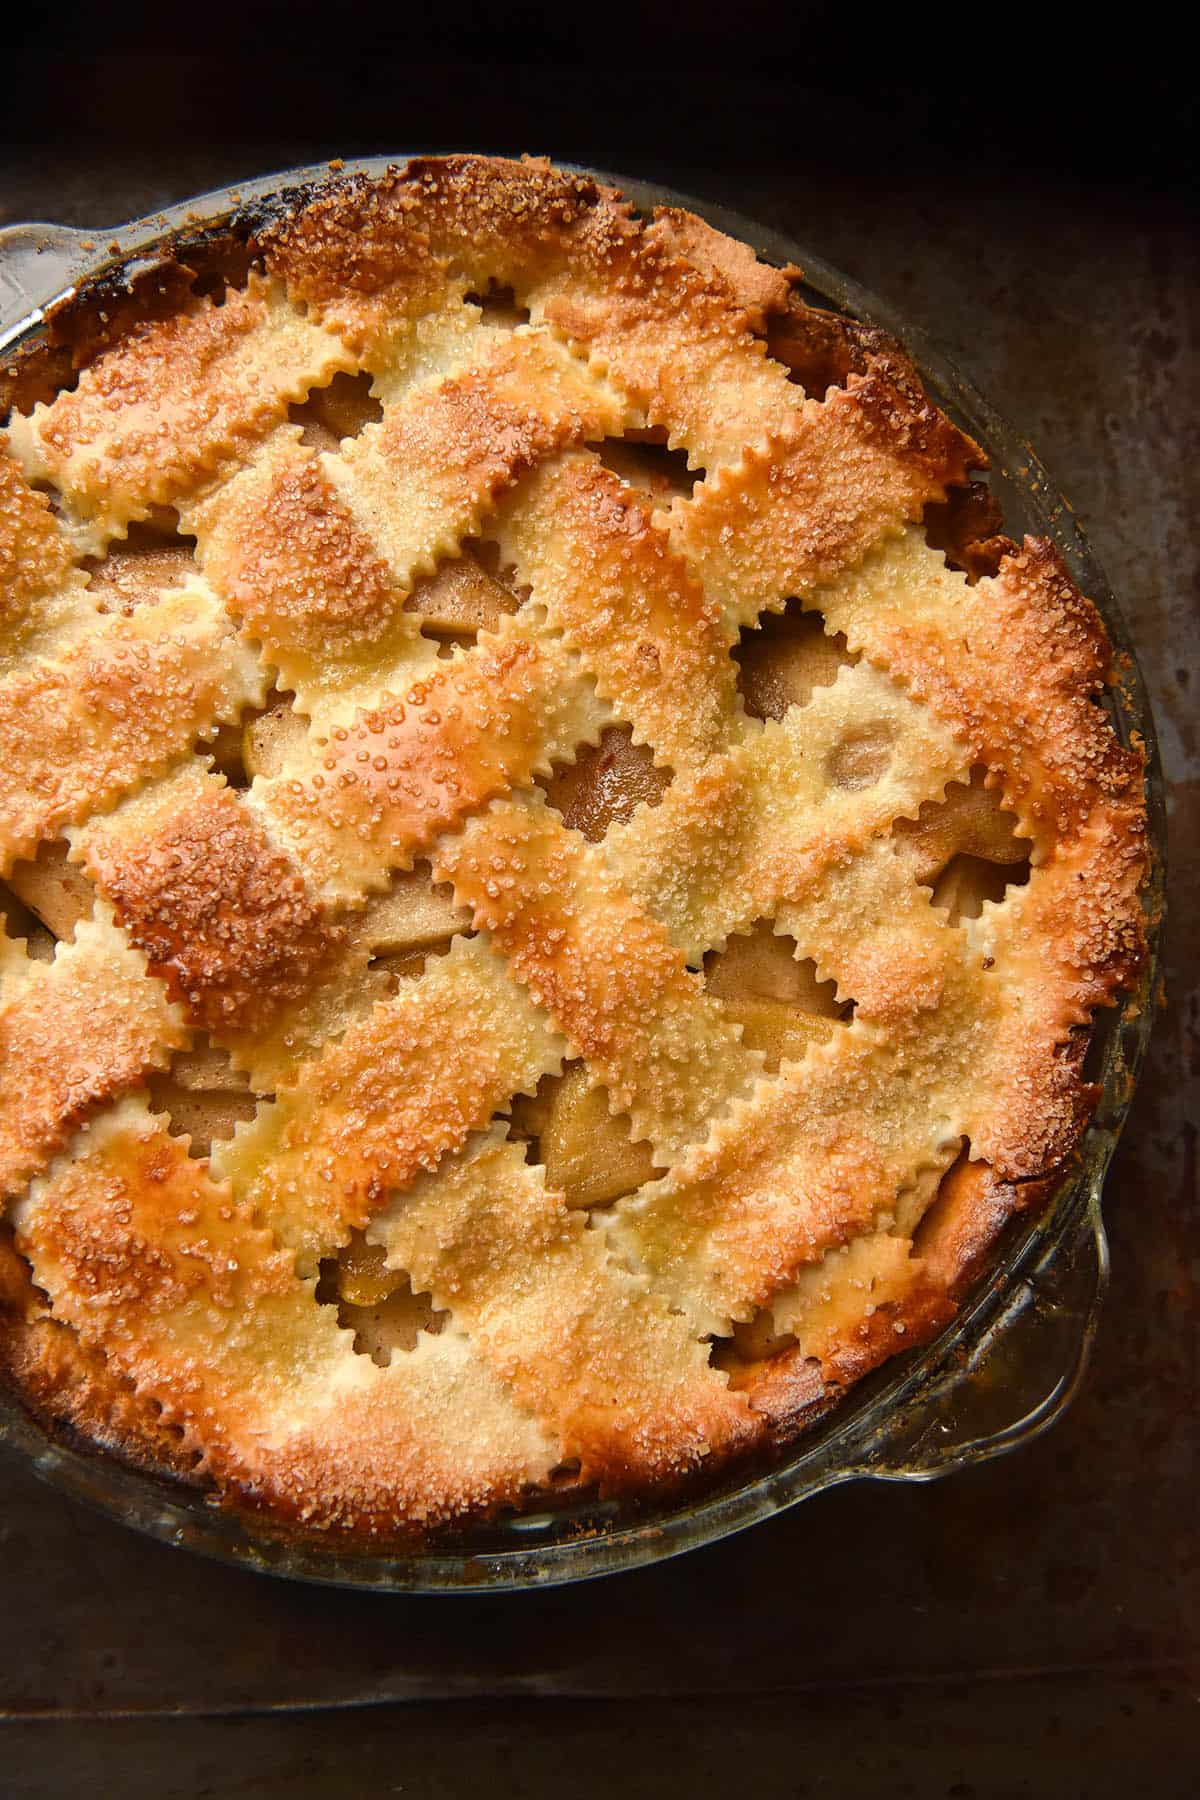 An aerial image of a low FODMAP apple pie with a golden brown lattice topping topped with sugar. The pie sits in a glass pie dish atop a dark steel backdrop.